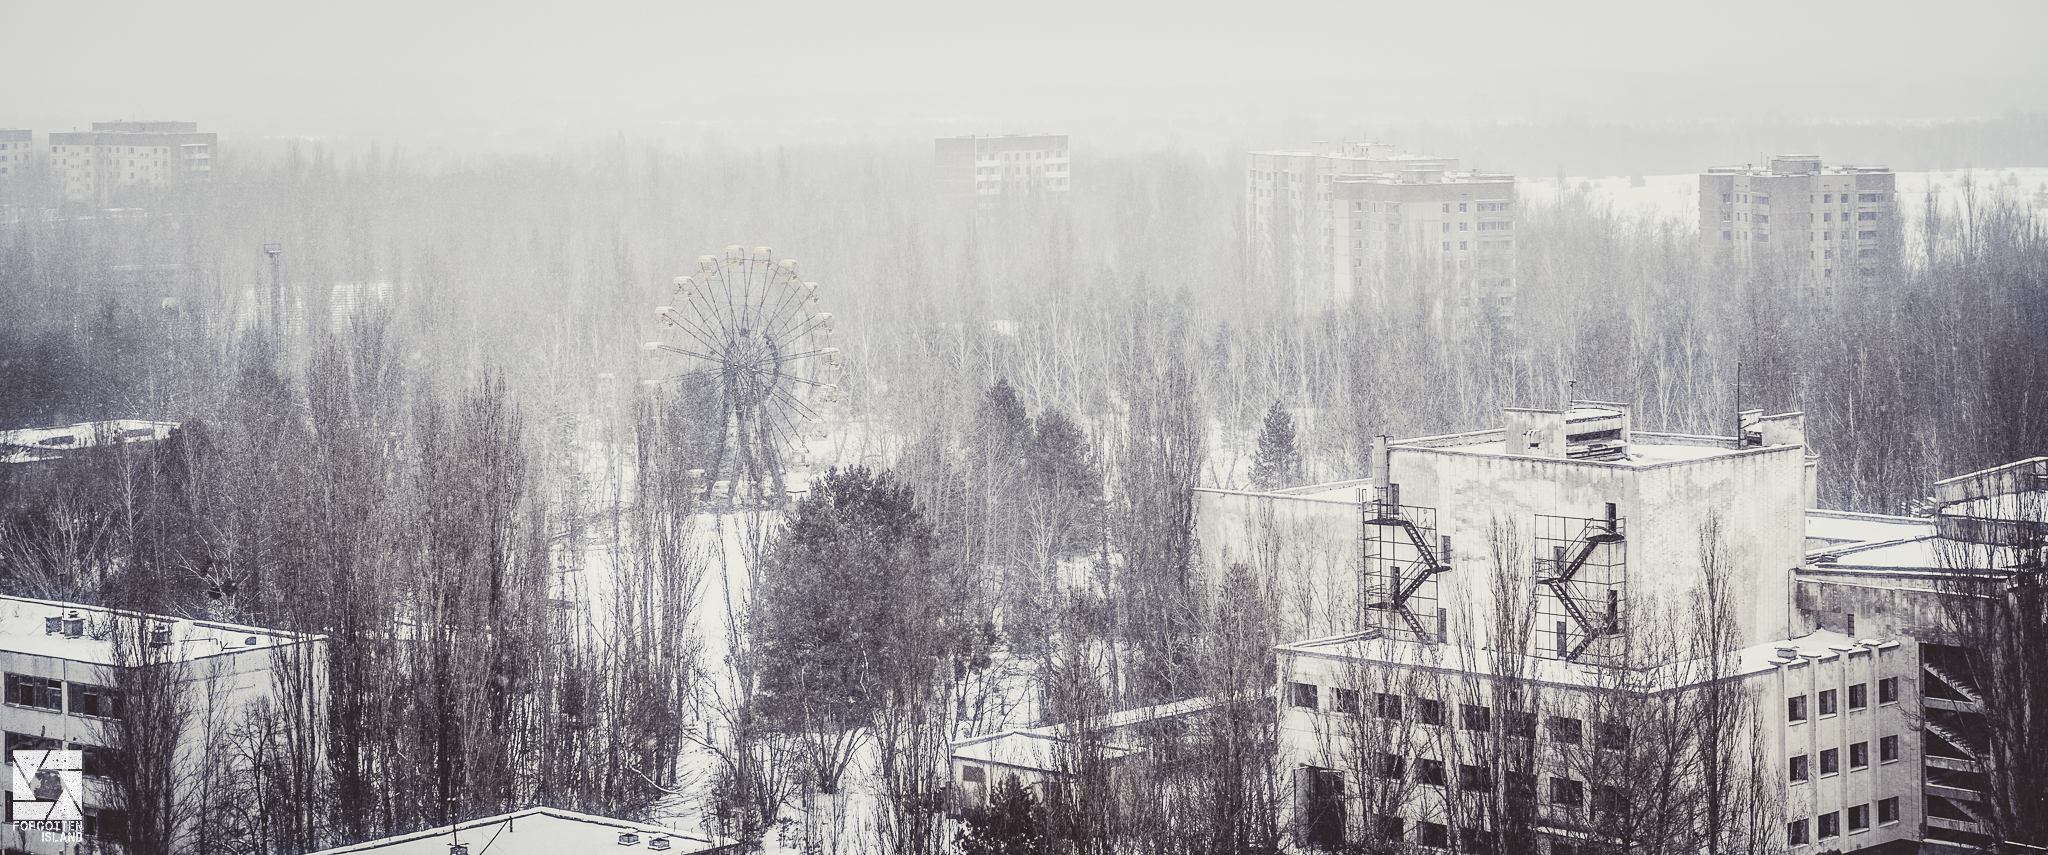 Pripyat in Winter from a rooftop